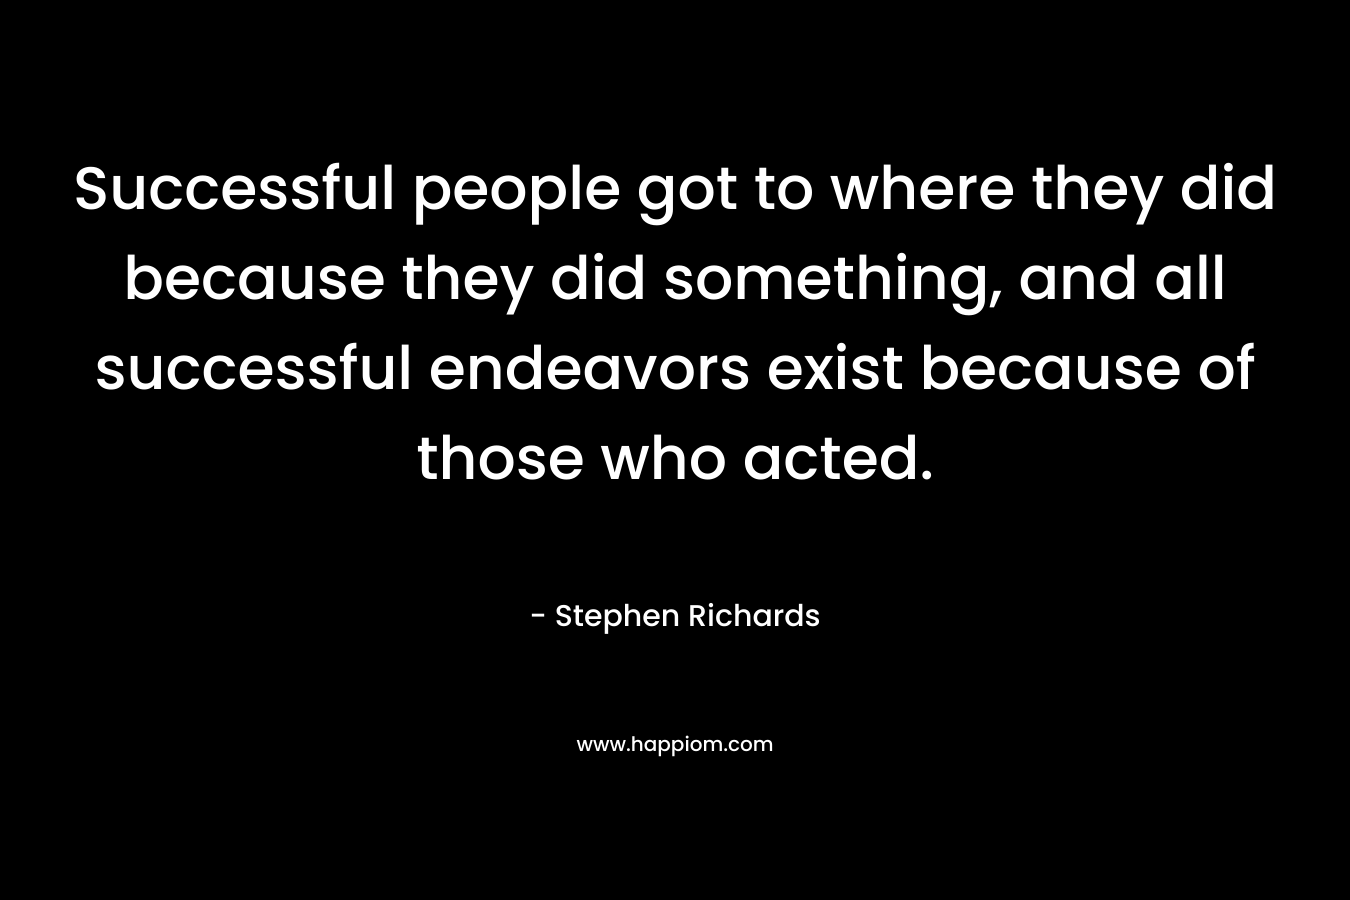 Successful people got to where they did because they did something, and all successful endeavors exist because of those who acted.